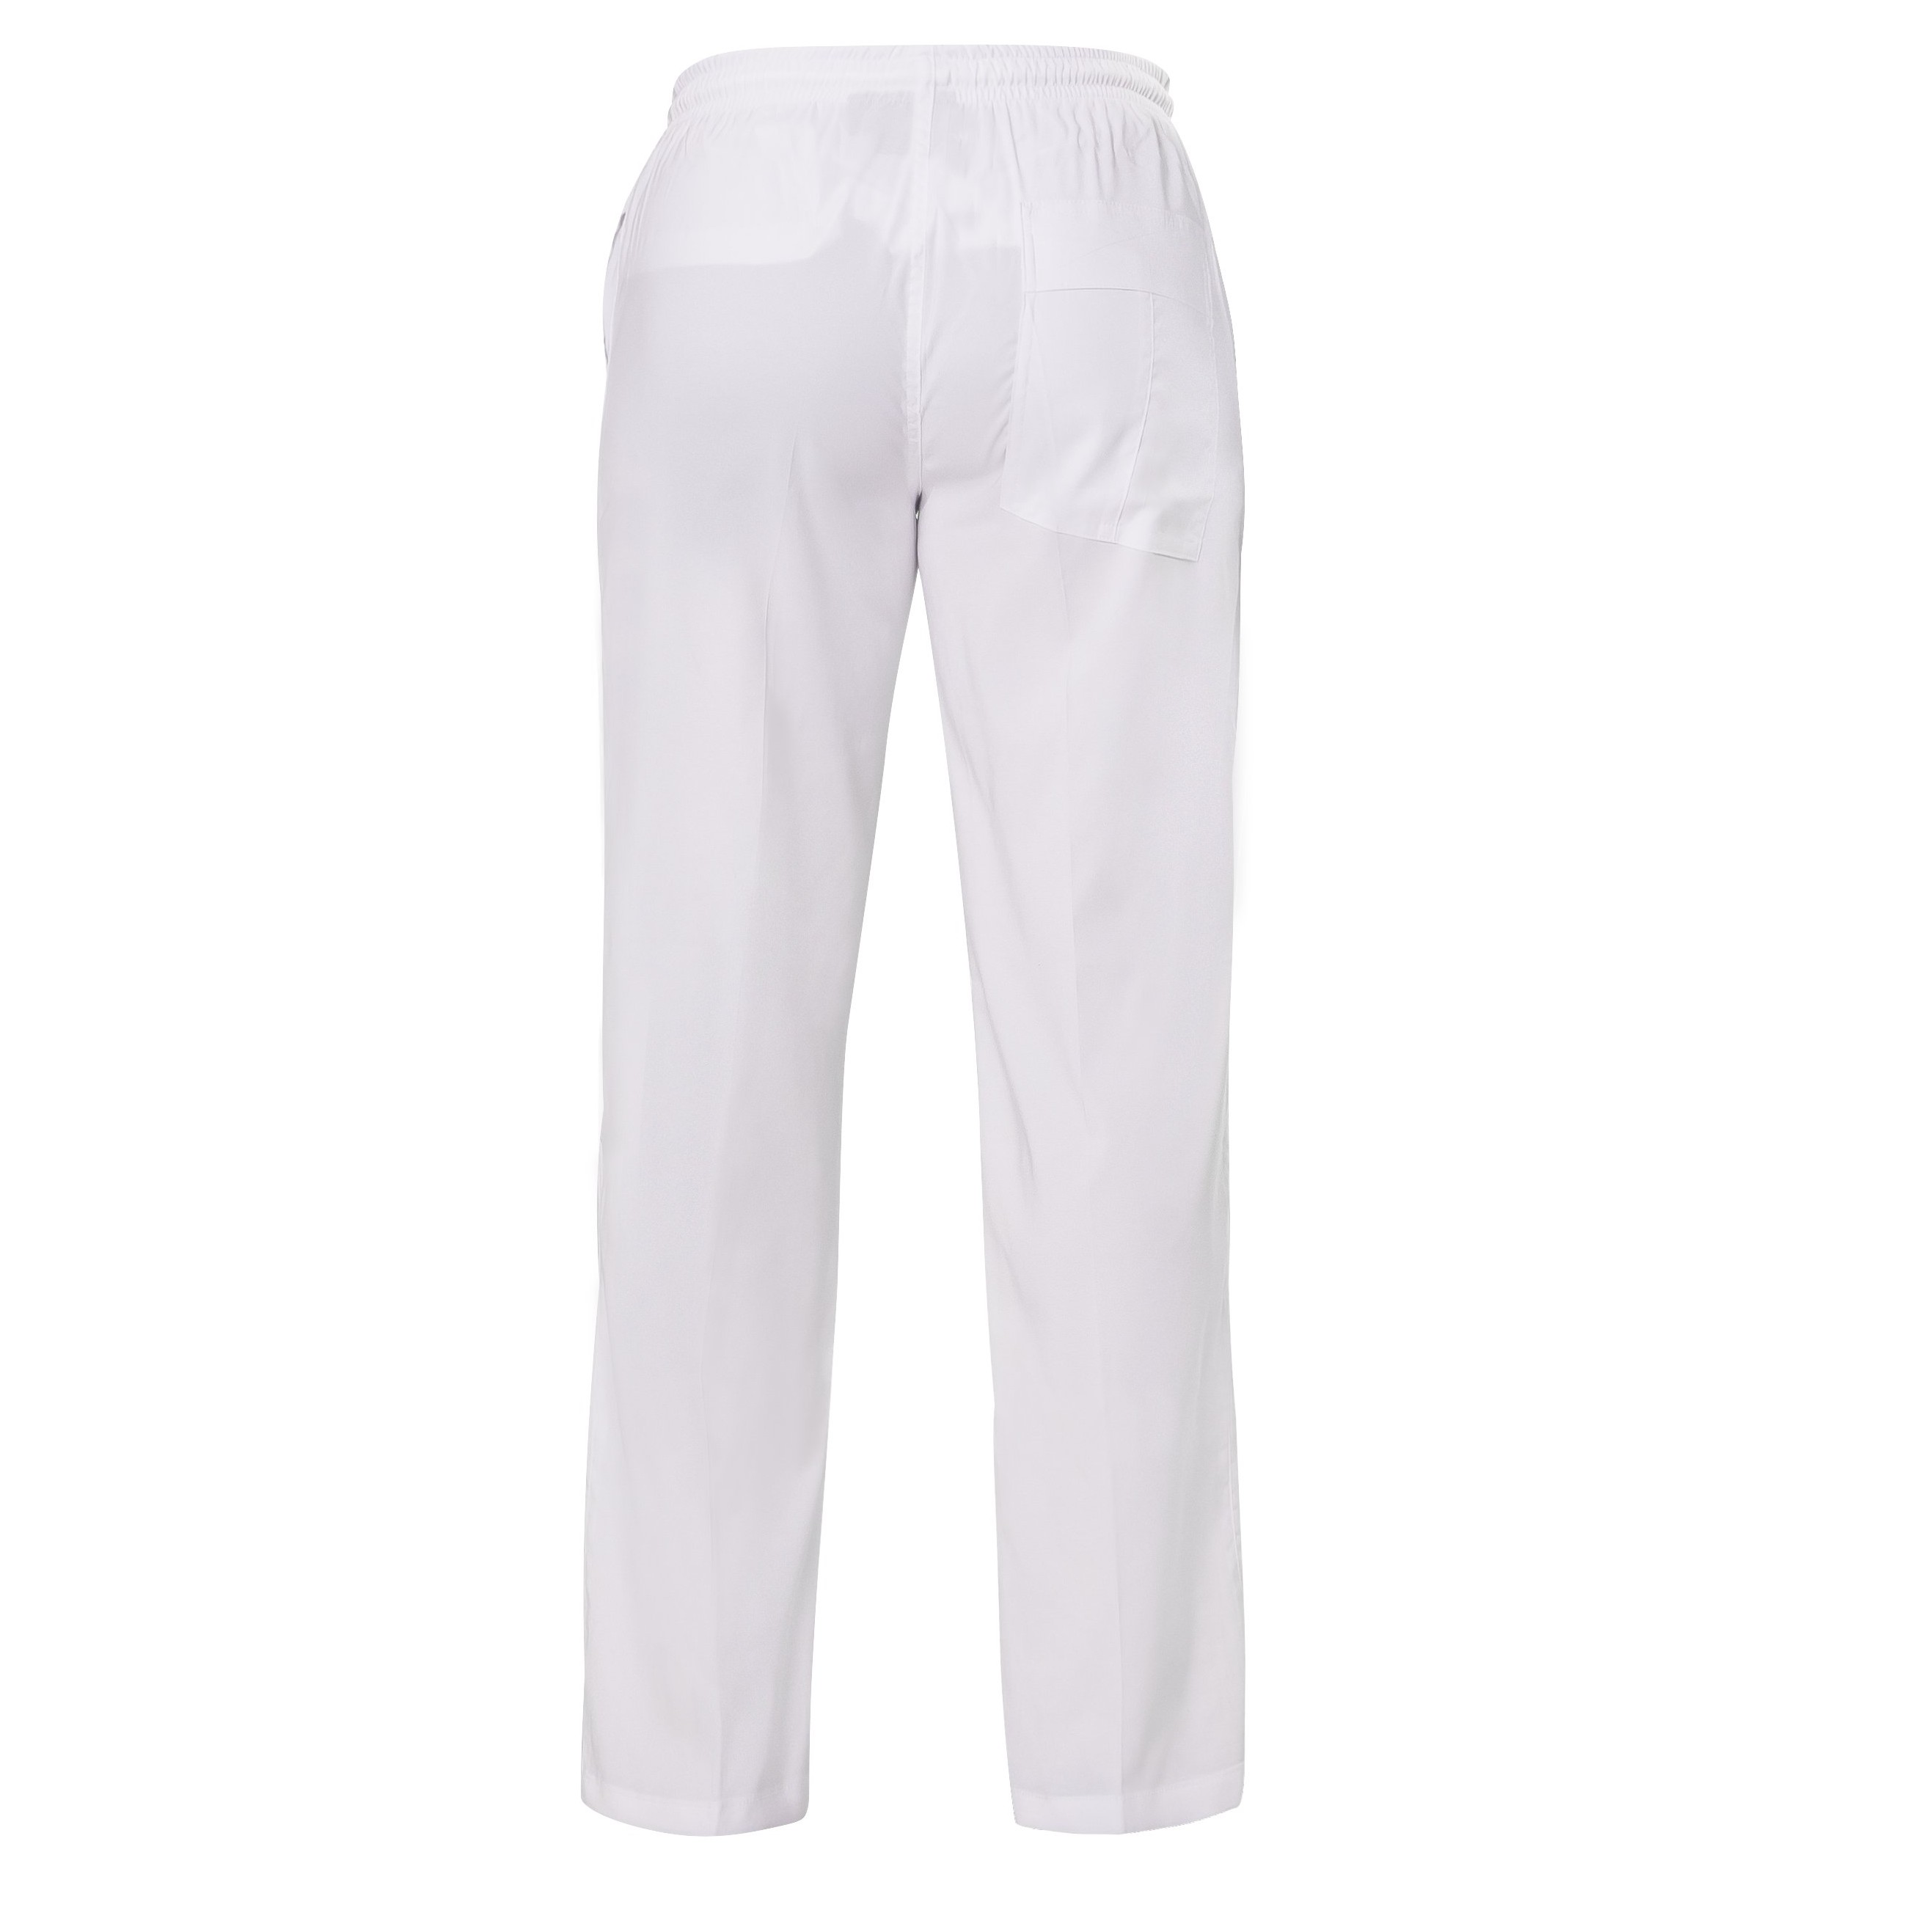 White Medical-Surgical Pants For Men or Woman